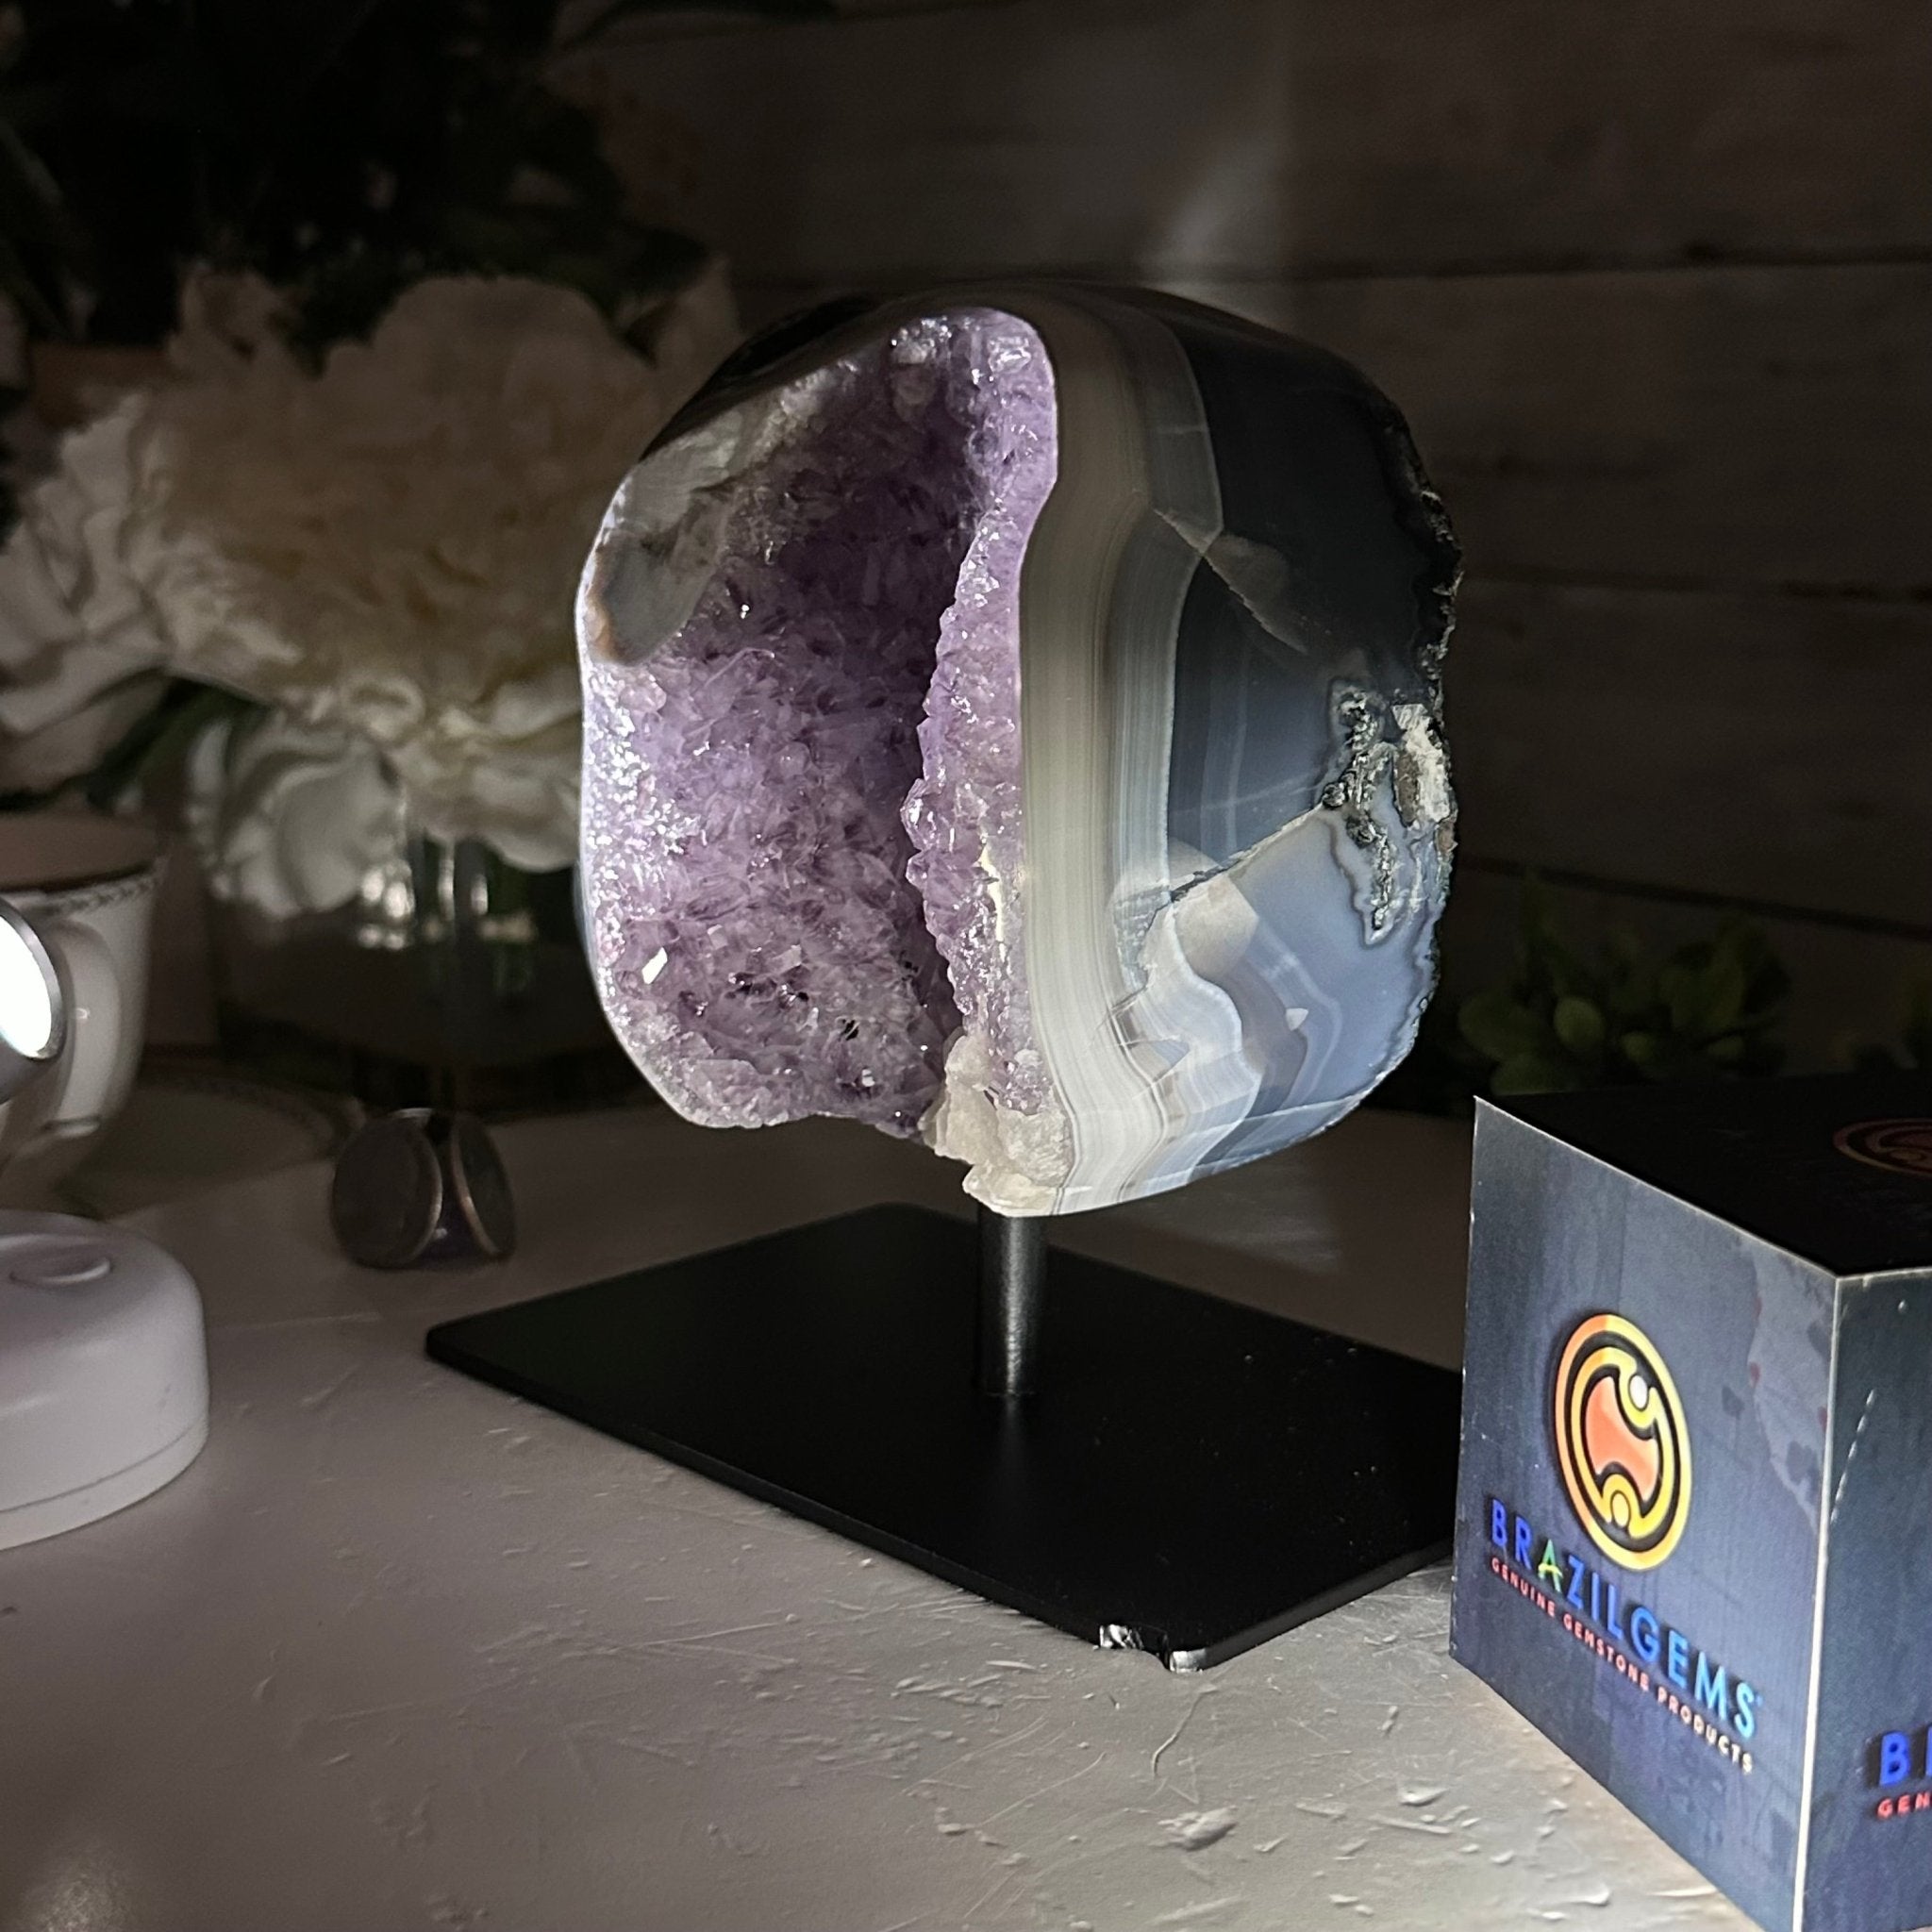 Amethyst Cluster on a Metal Base, 4.3 lbs & 6.1" Tall #5491-0174 - Brazil GemsBrazil GemsAmethyst Cluster on a Metal Base, 4.3 lbs & 6.1" Tall #5491-0174Clusters on Fixed Bases5491-0174